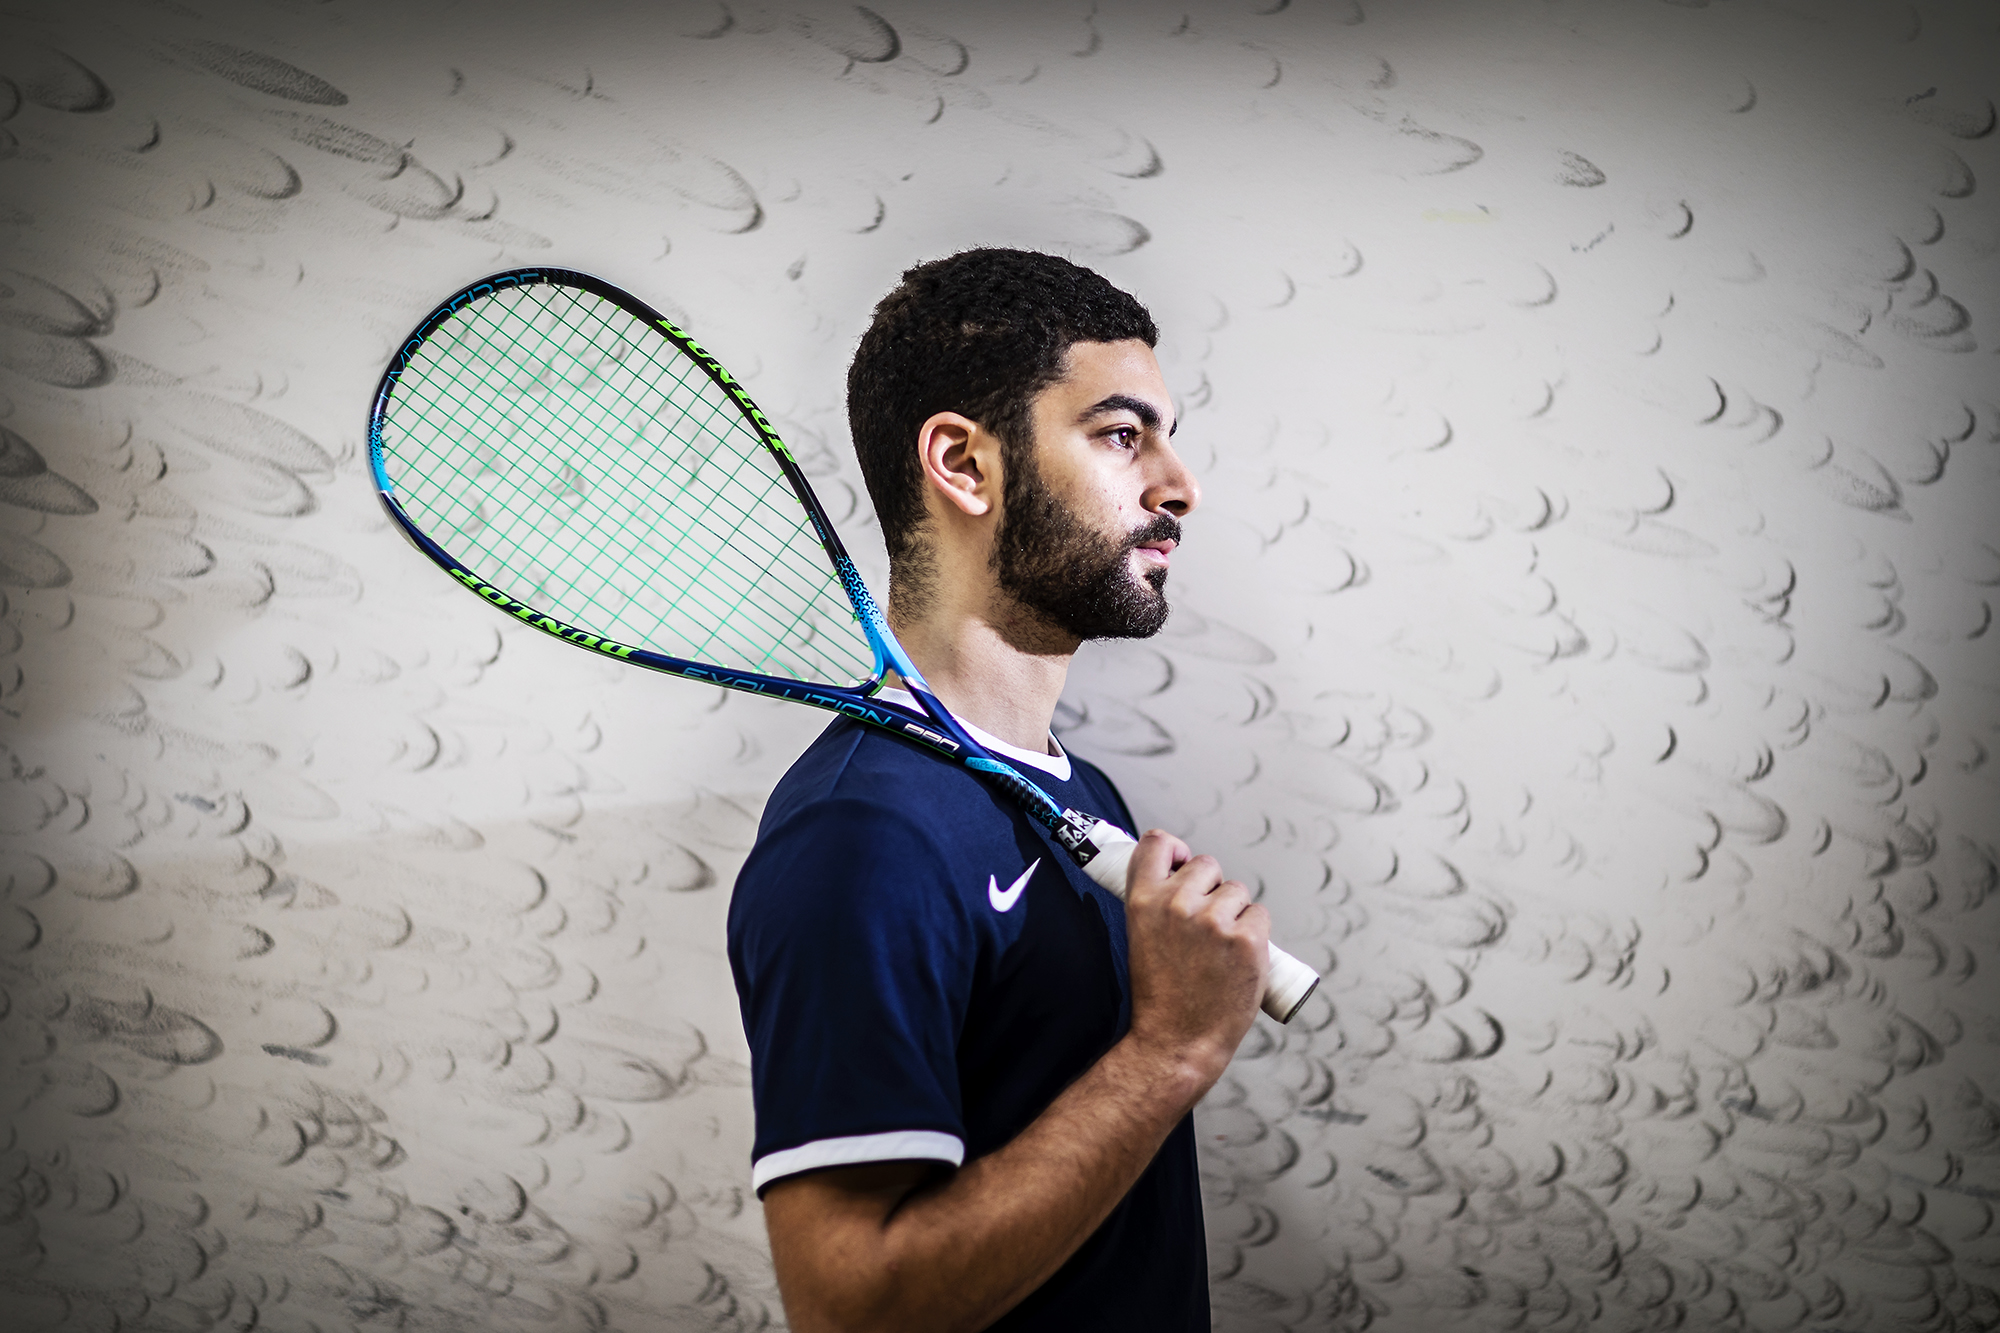 Aly Abou Eleinen holds a racquet on his shoulder in front of a wall showing ball marks.